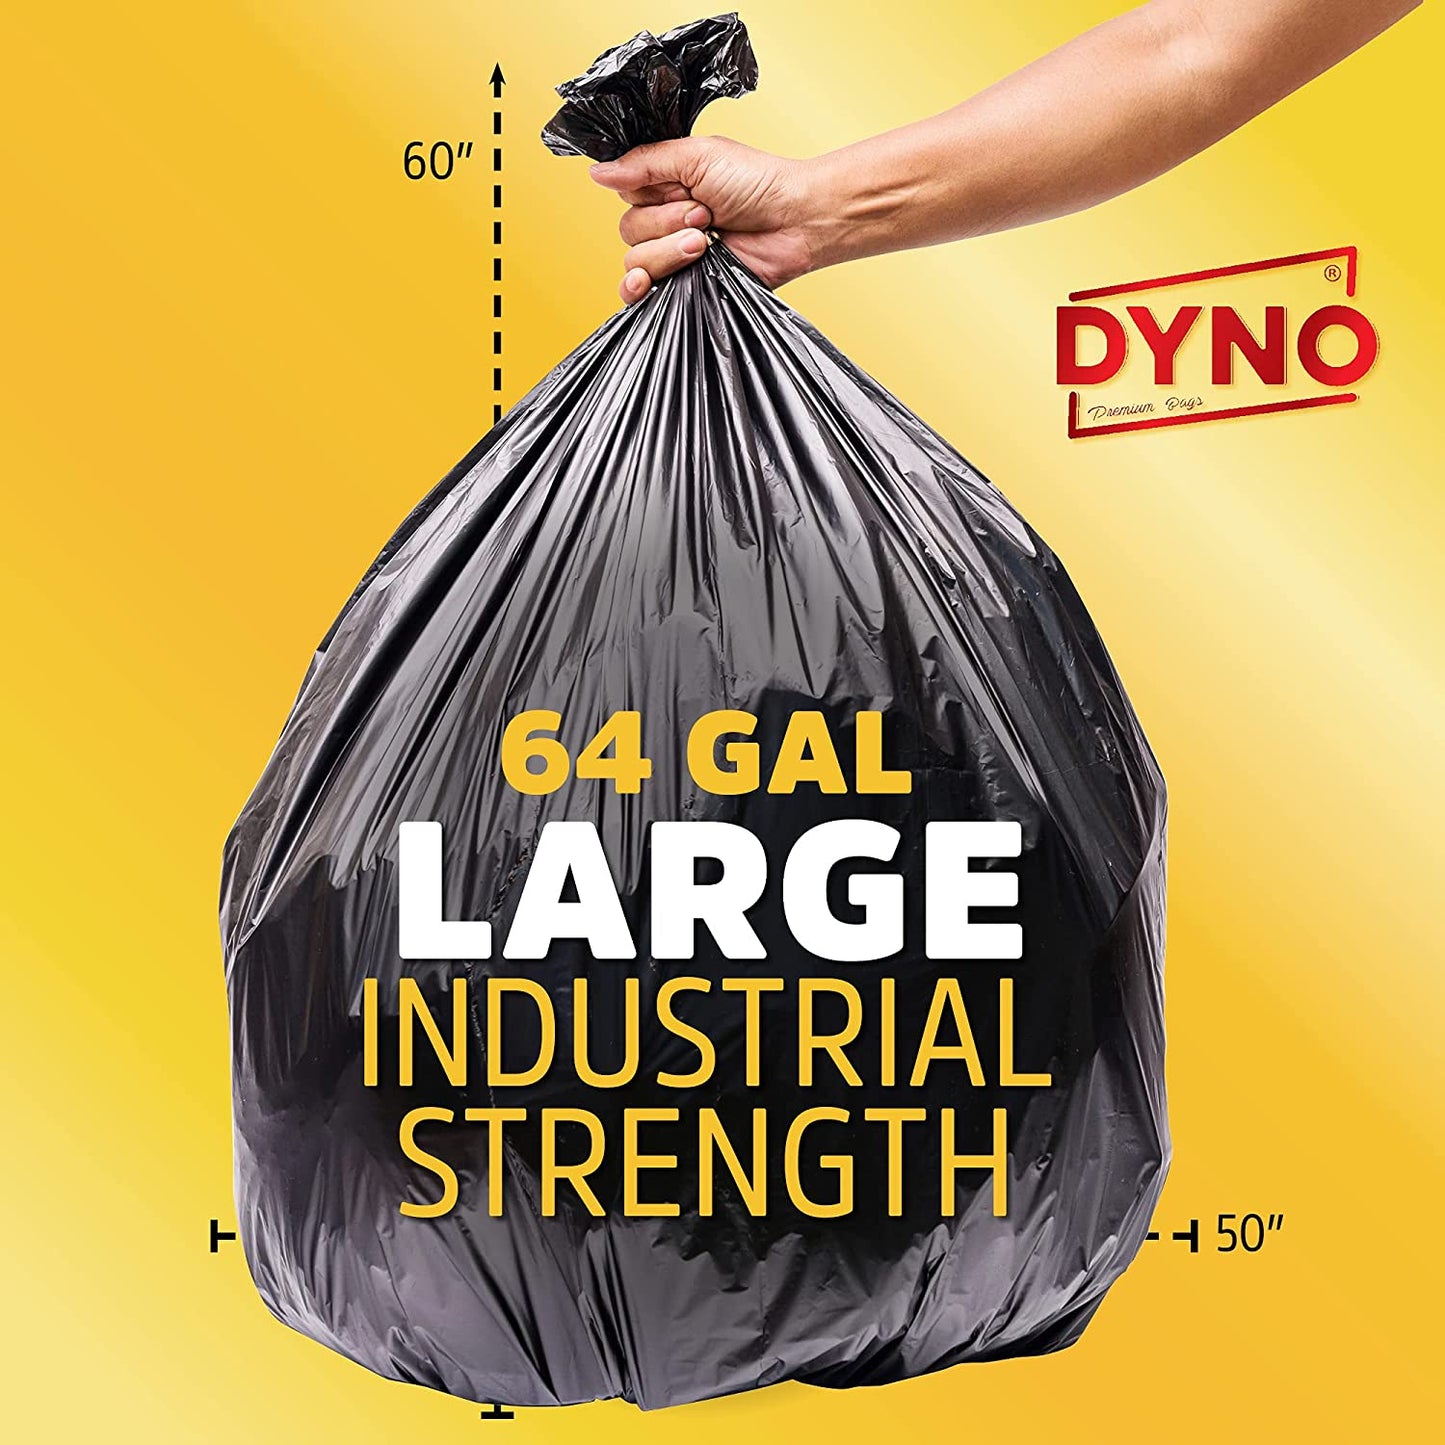 Extra Large Black Heavy Duty Trash Bag, Larger And Thicker Garbage